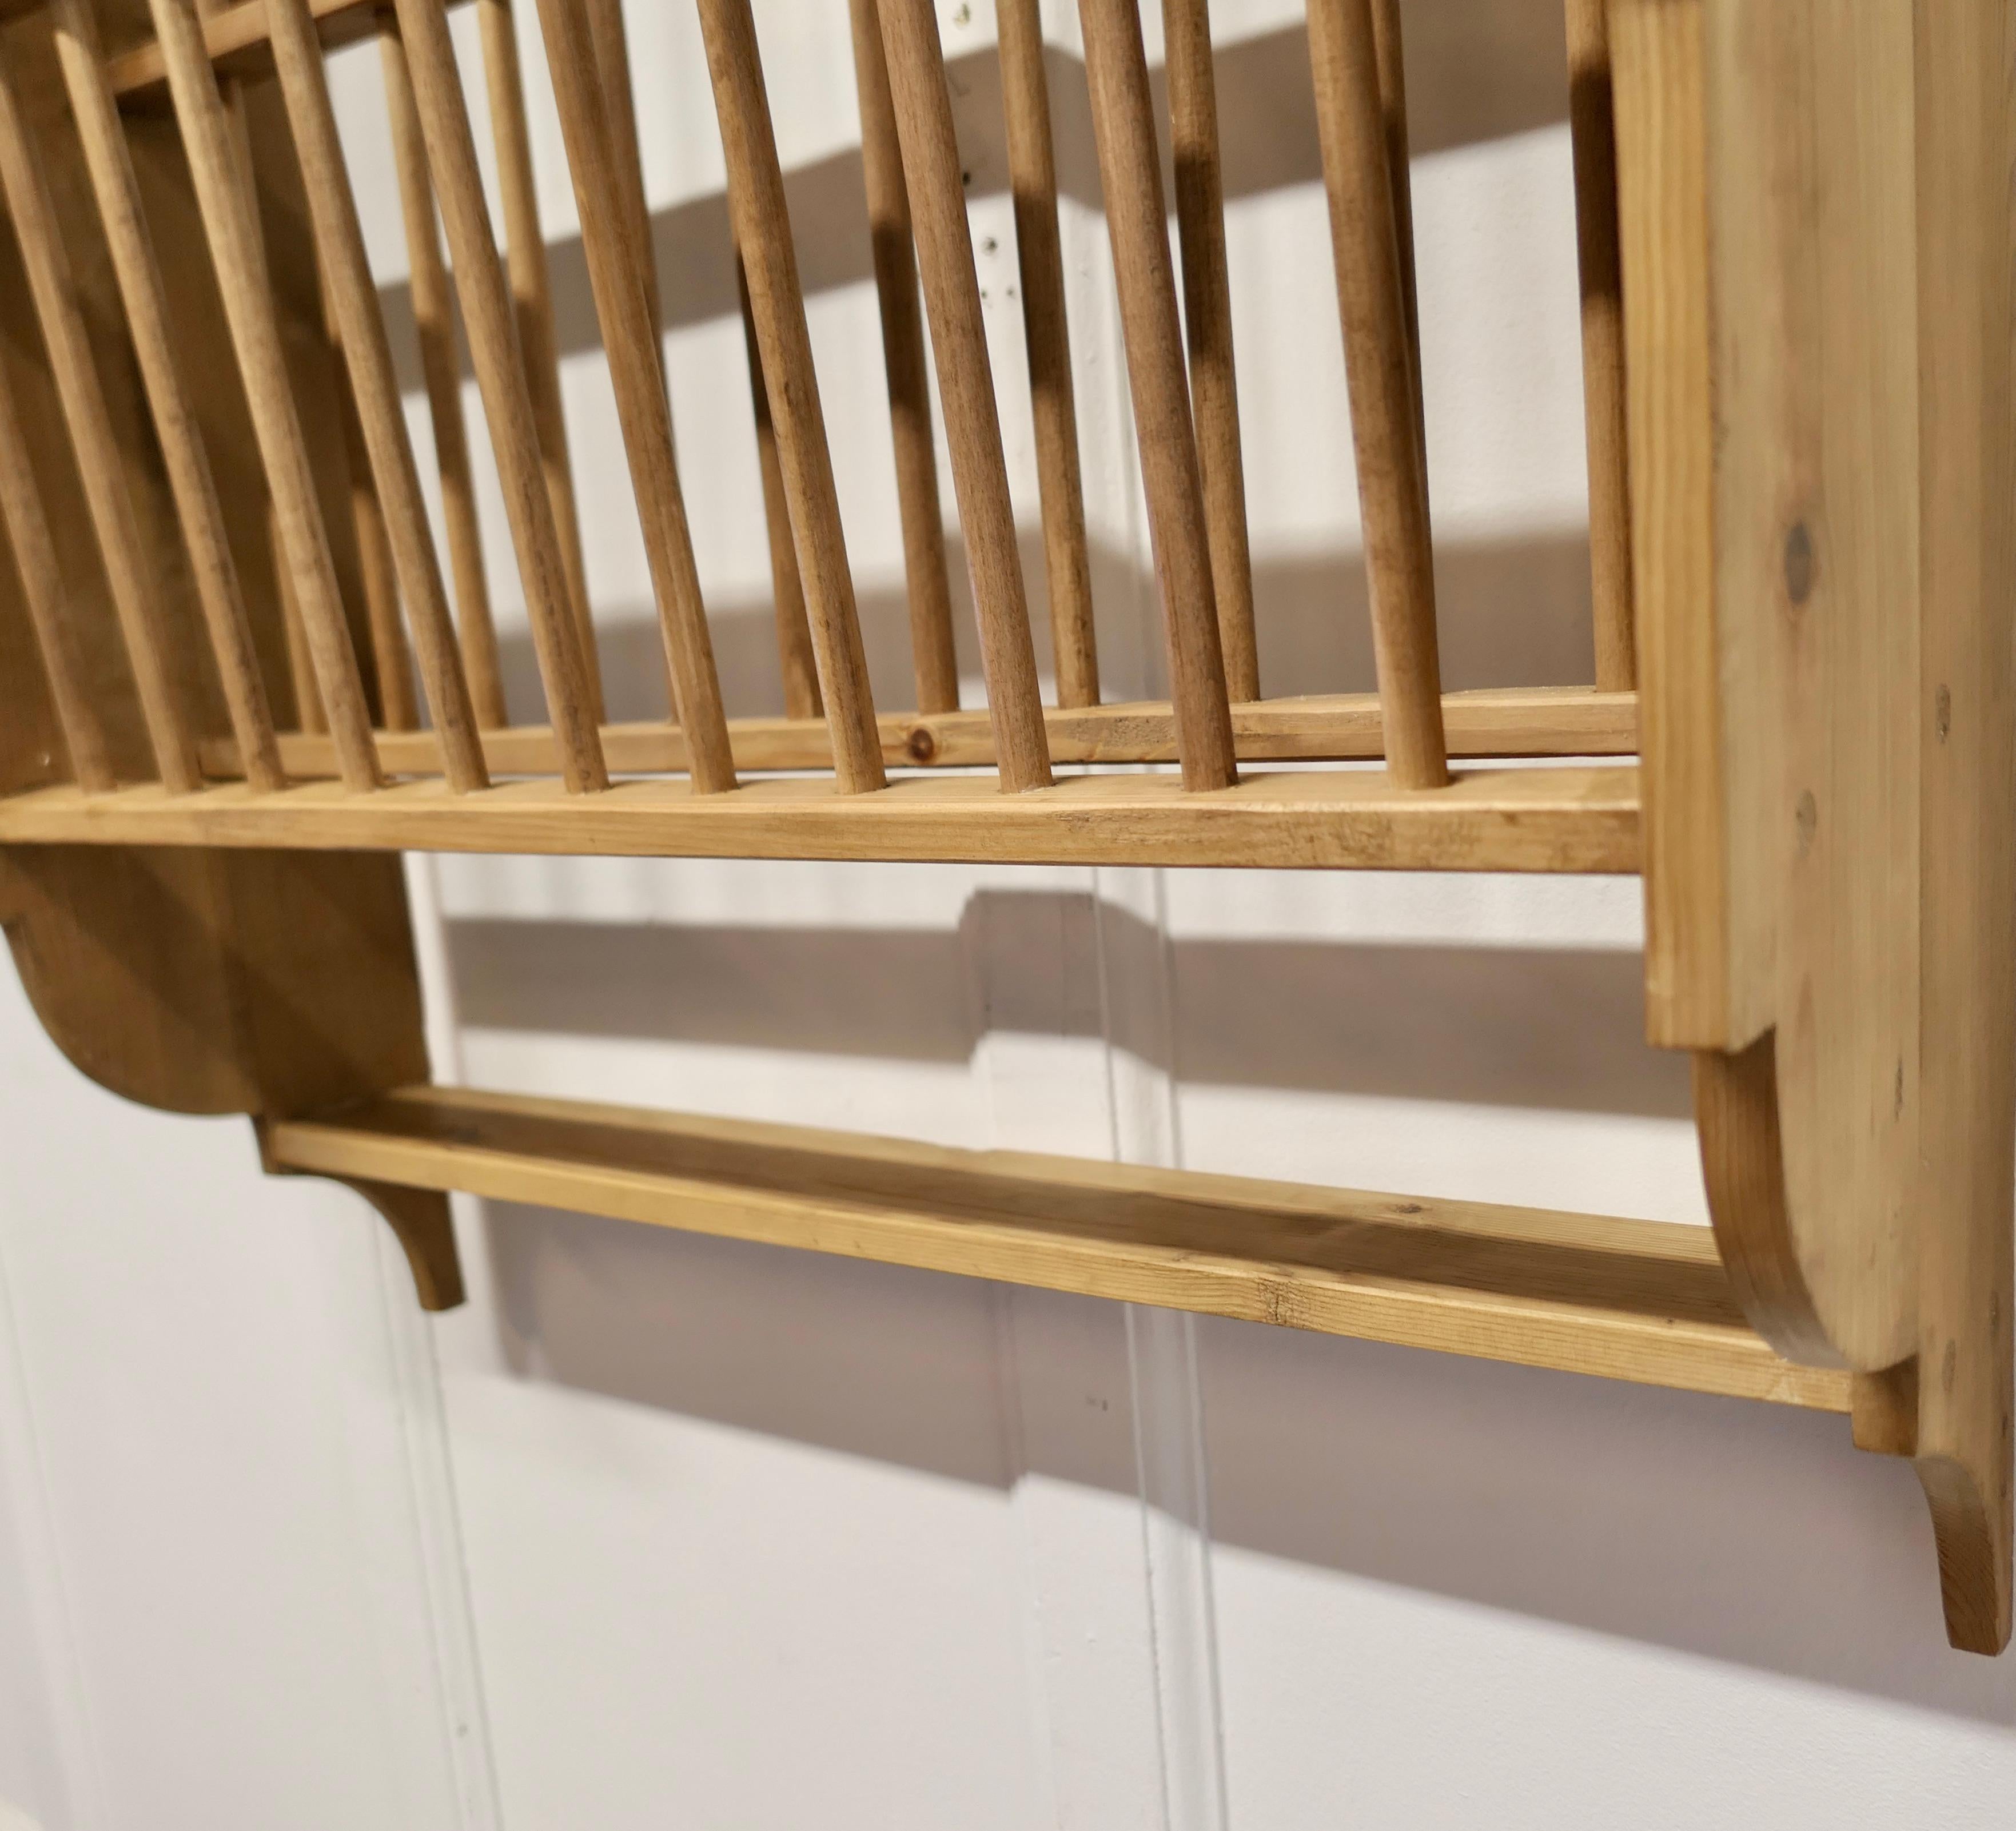 A Large Wall Hanging Pine Plate Rack

This useful piece hangs on the wall and drains and stores plates until required
It has a pine frame and wooden dowels with a waterfall shape, allowing 2 rows of plates to be stored at any one time, below there